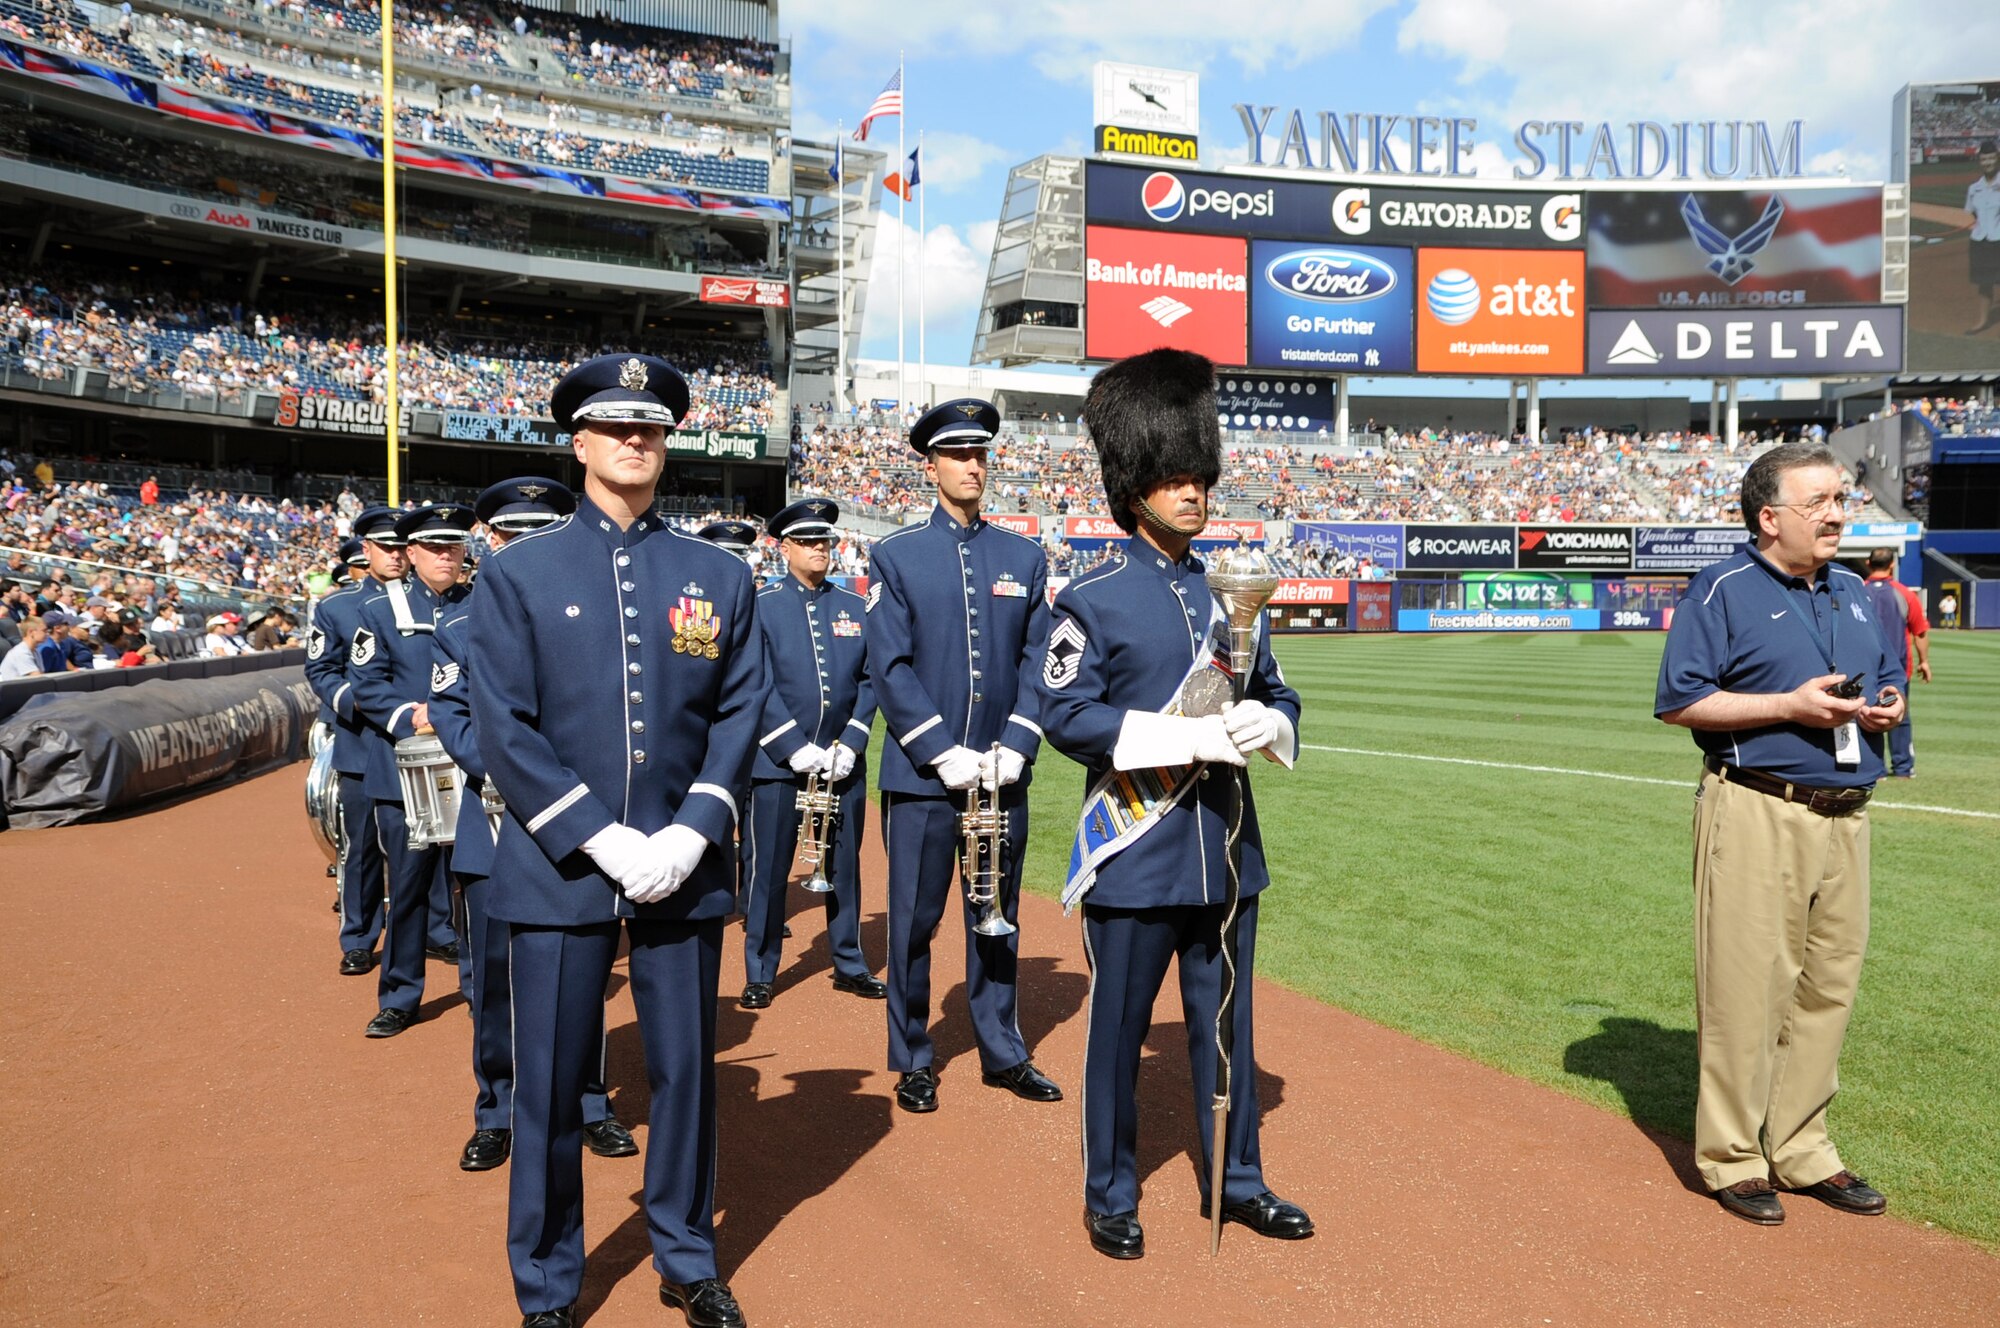 The U.S. Air Force Band and U.S. Air Force Honor Guard prepare to perform during the opening ceremony for the Yankees vs. Red Sox game Aug. 18 at the Yankee Stadium, Bronx, N.Y. The performance kicked off the ceremonial units’ participation in Air Force Week 2012. (U.S. Air Force photo by Senior Airman Tabitha N. Haynes) 